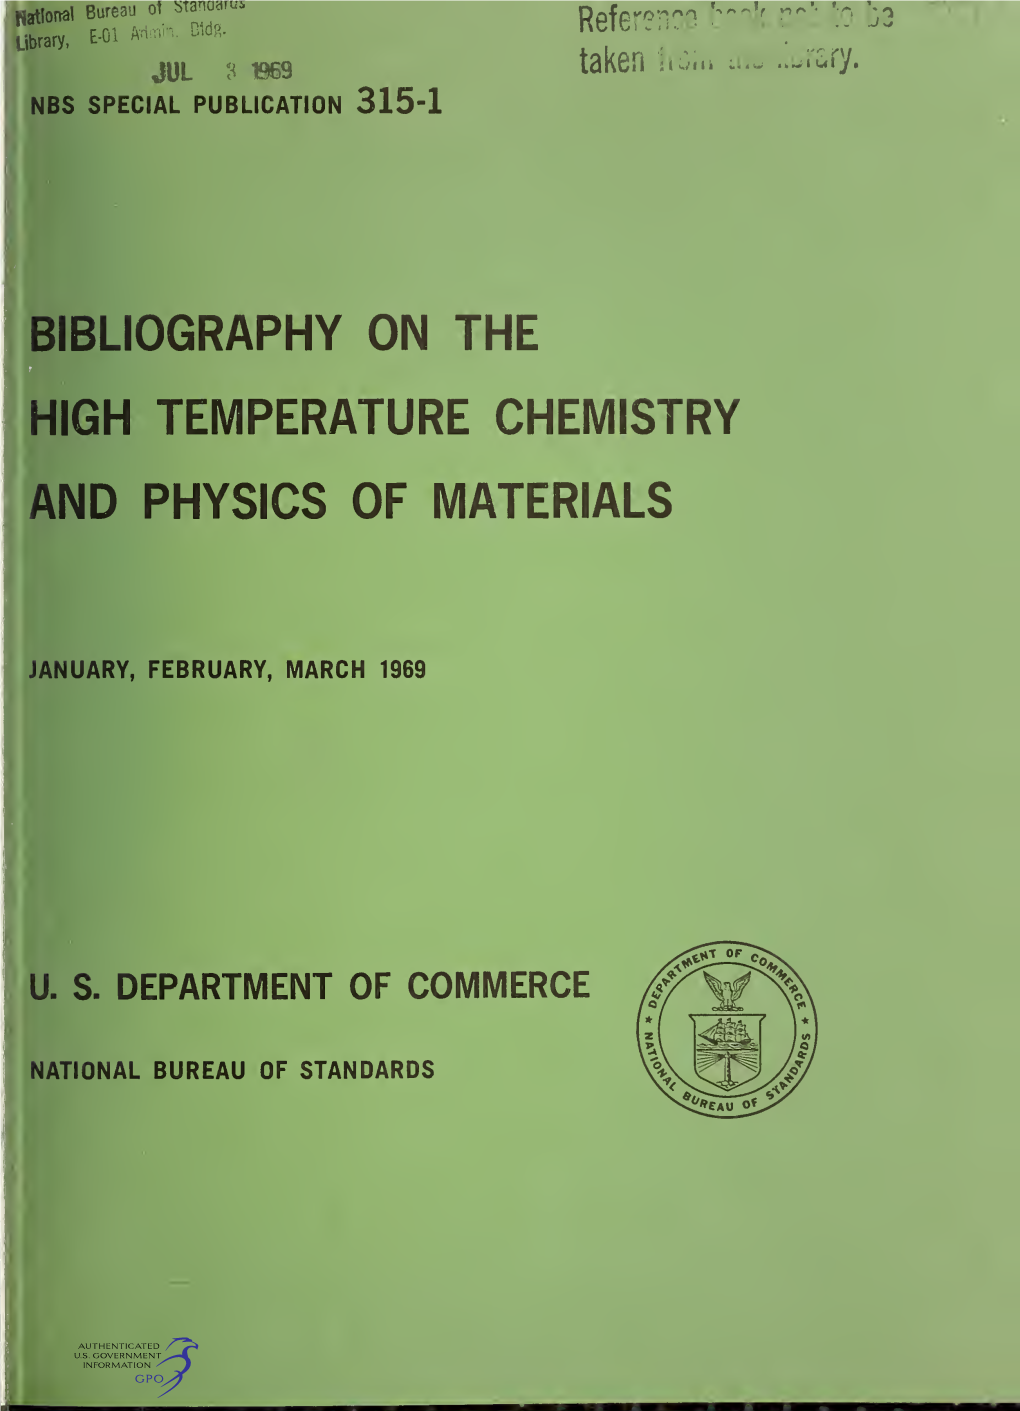 BIBLIOGRAPHY on the HIGH TEMPERATURE CHEMISTRY and PHYSICS of MATERIALS